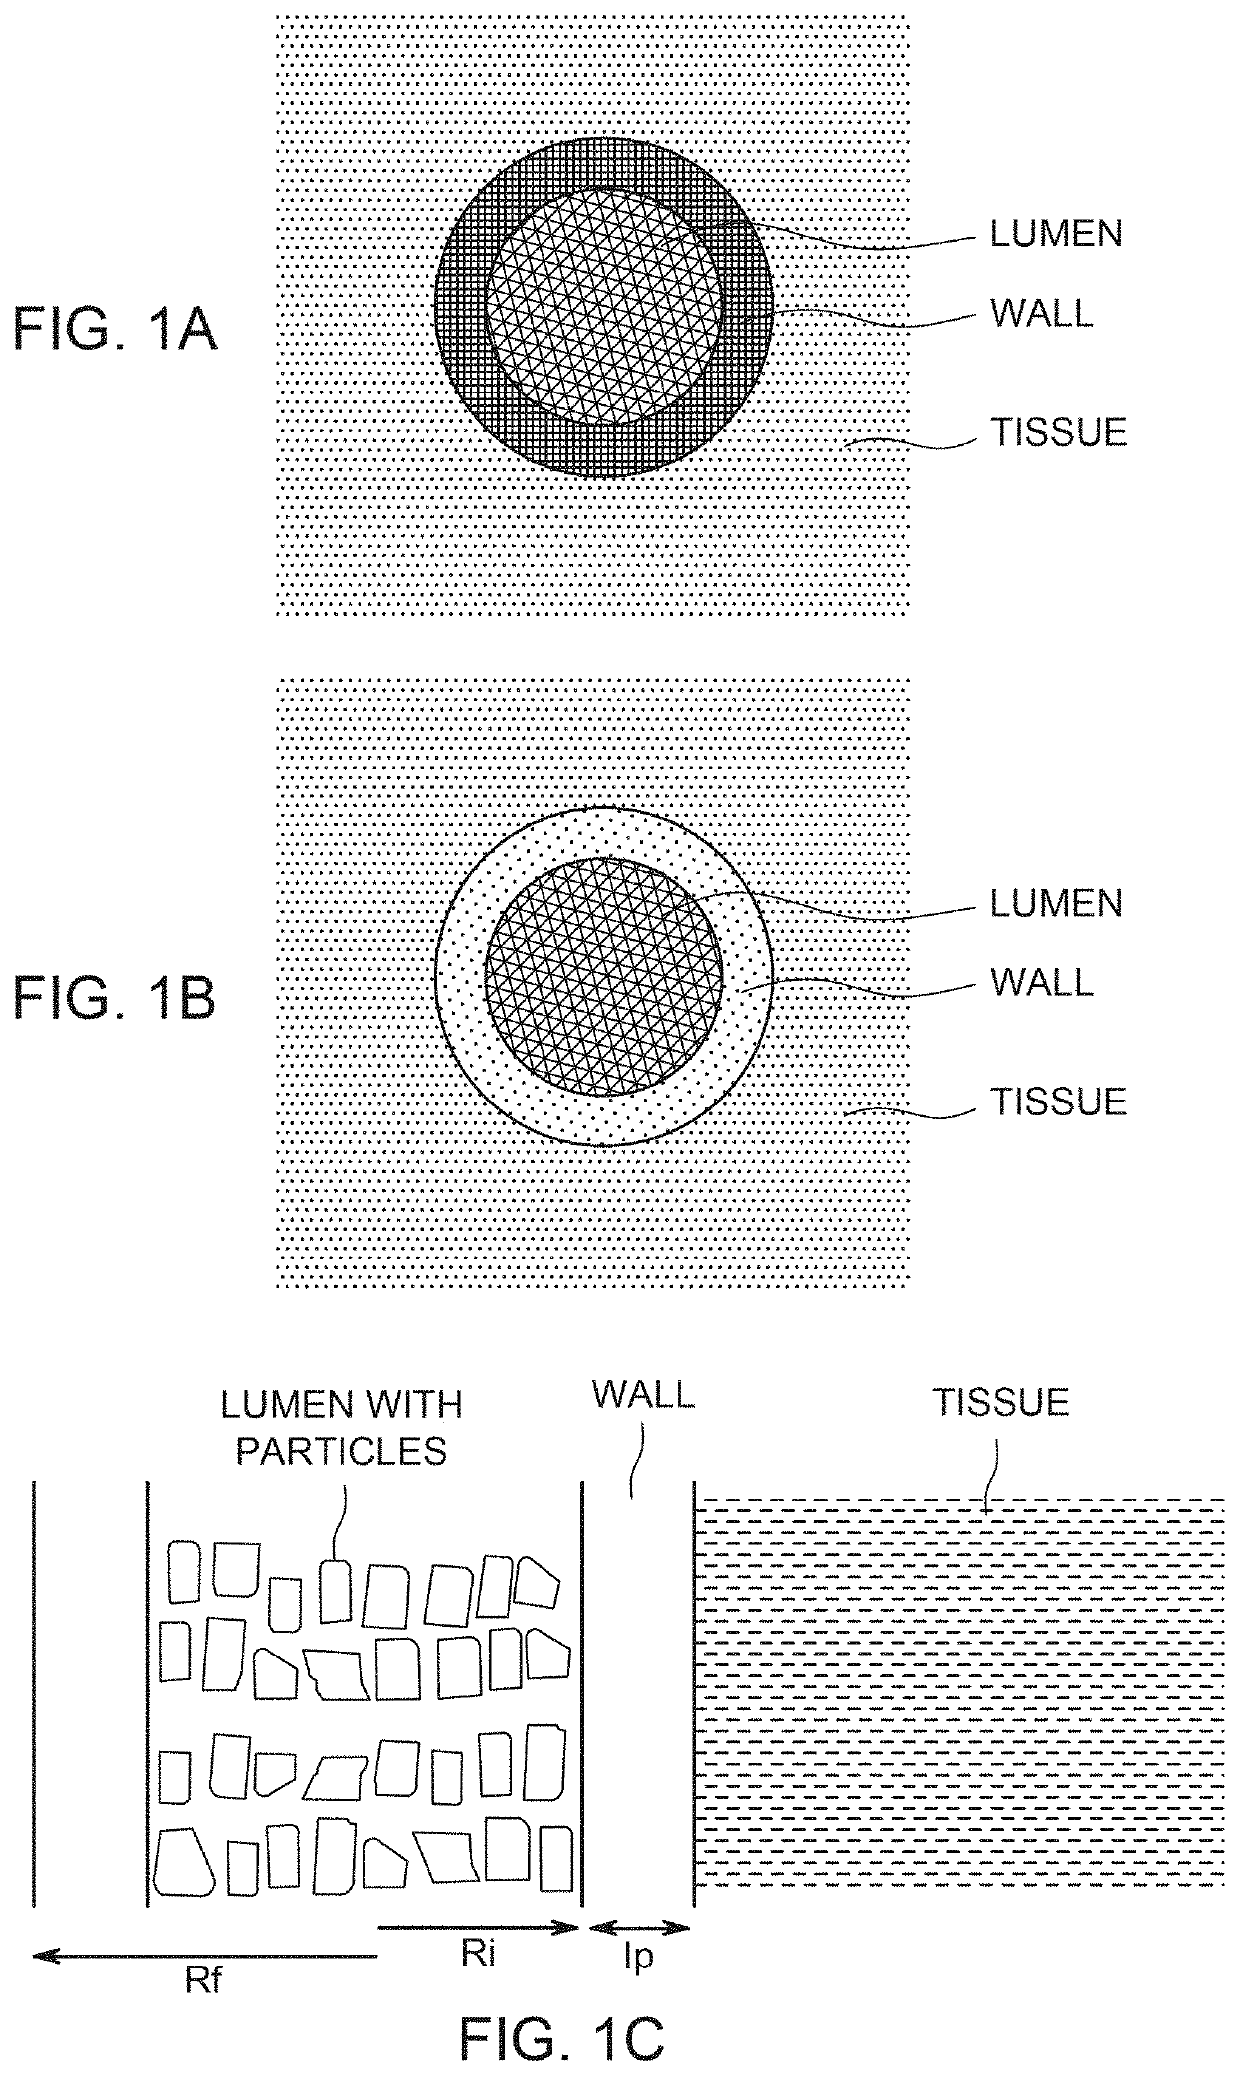 Implants and constructs including hollow fibers